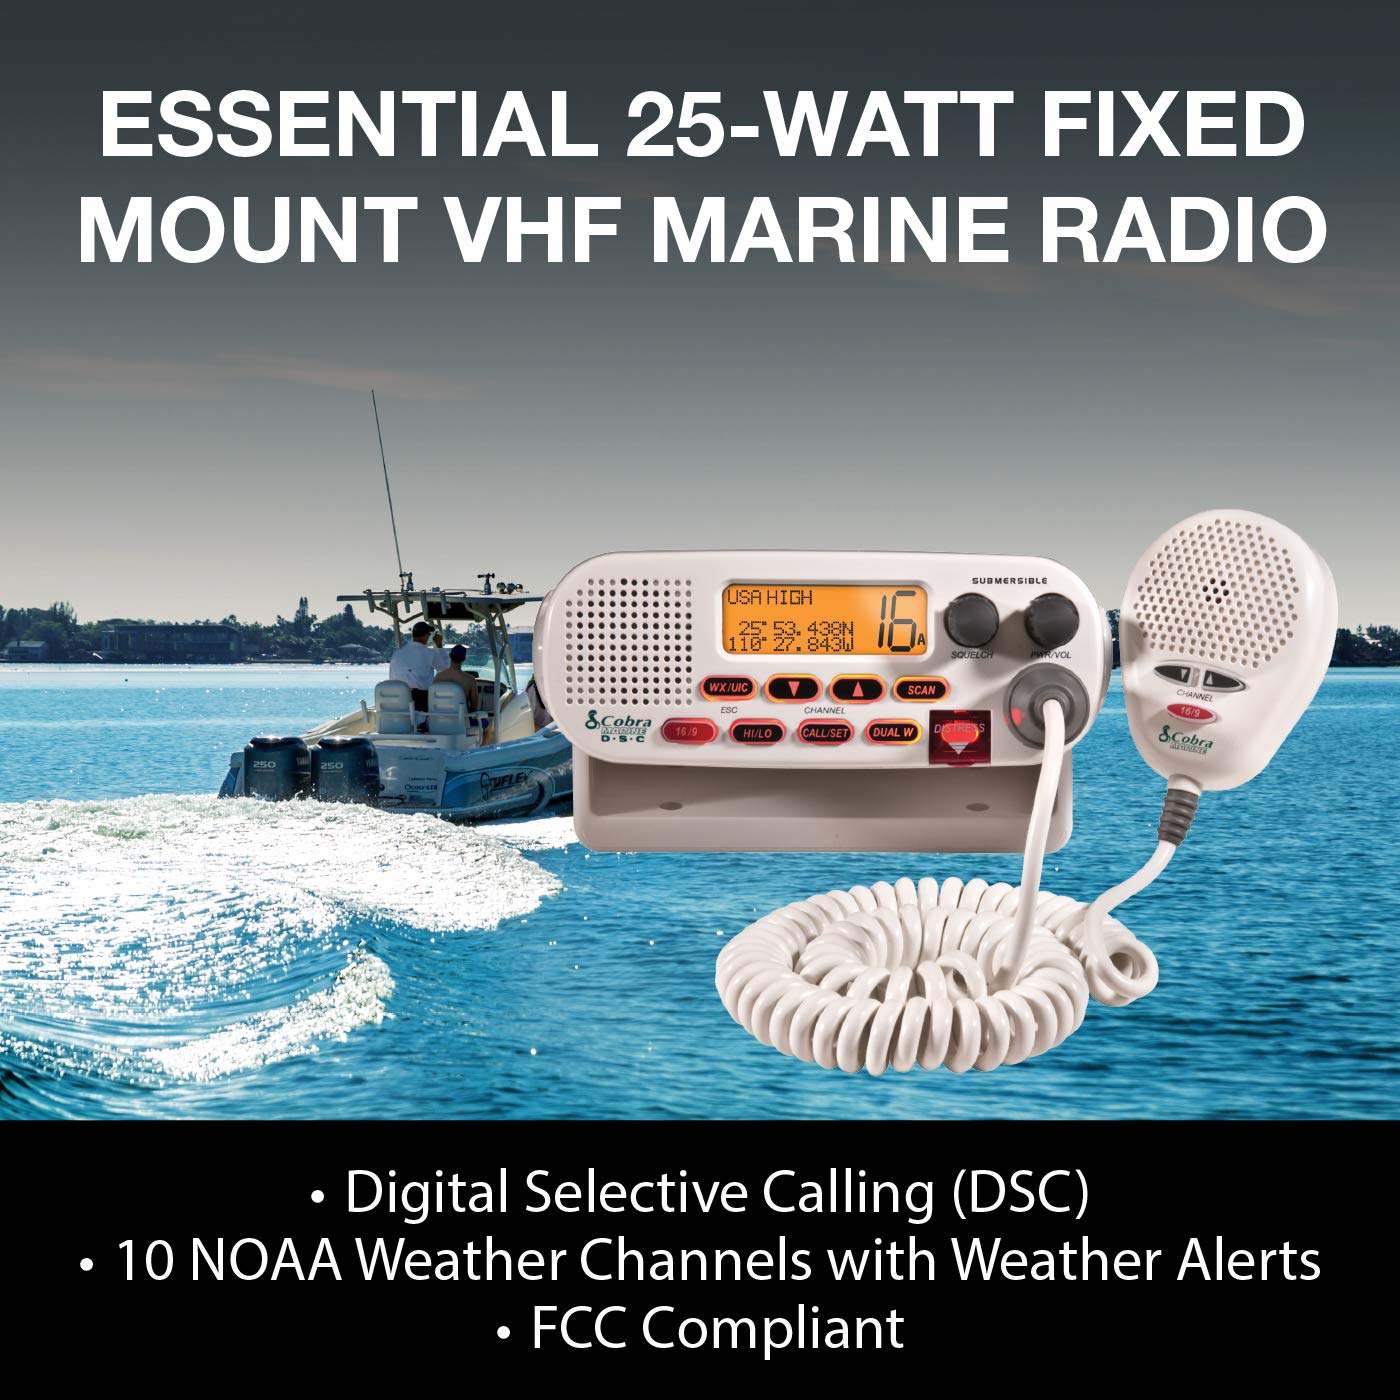 Cobra MR F45-D Fixed Mount VHF Marine Radio – 25 Watt VHF, Submersible, LCD Display, Noise Cancelling Microphone, NOAA Weather Channels, Signal Strength Meter, Scan Channels, White